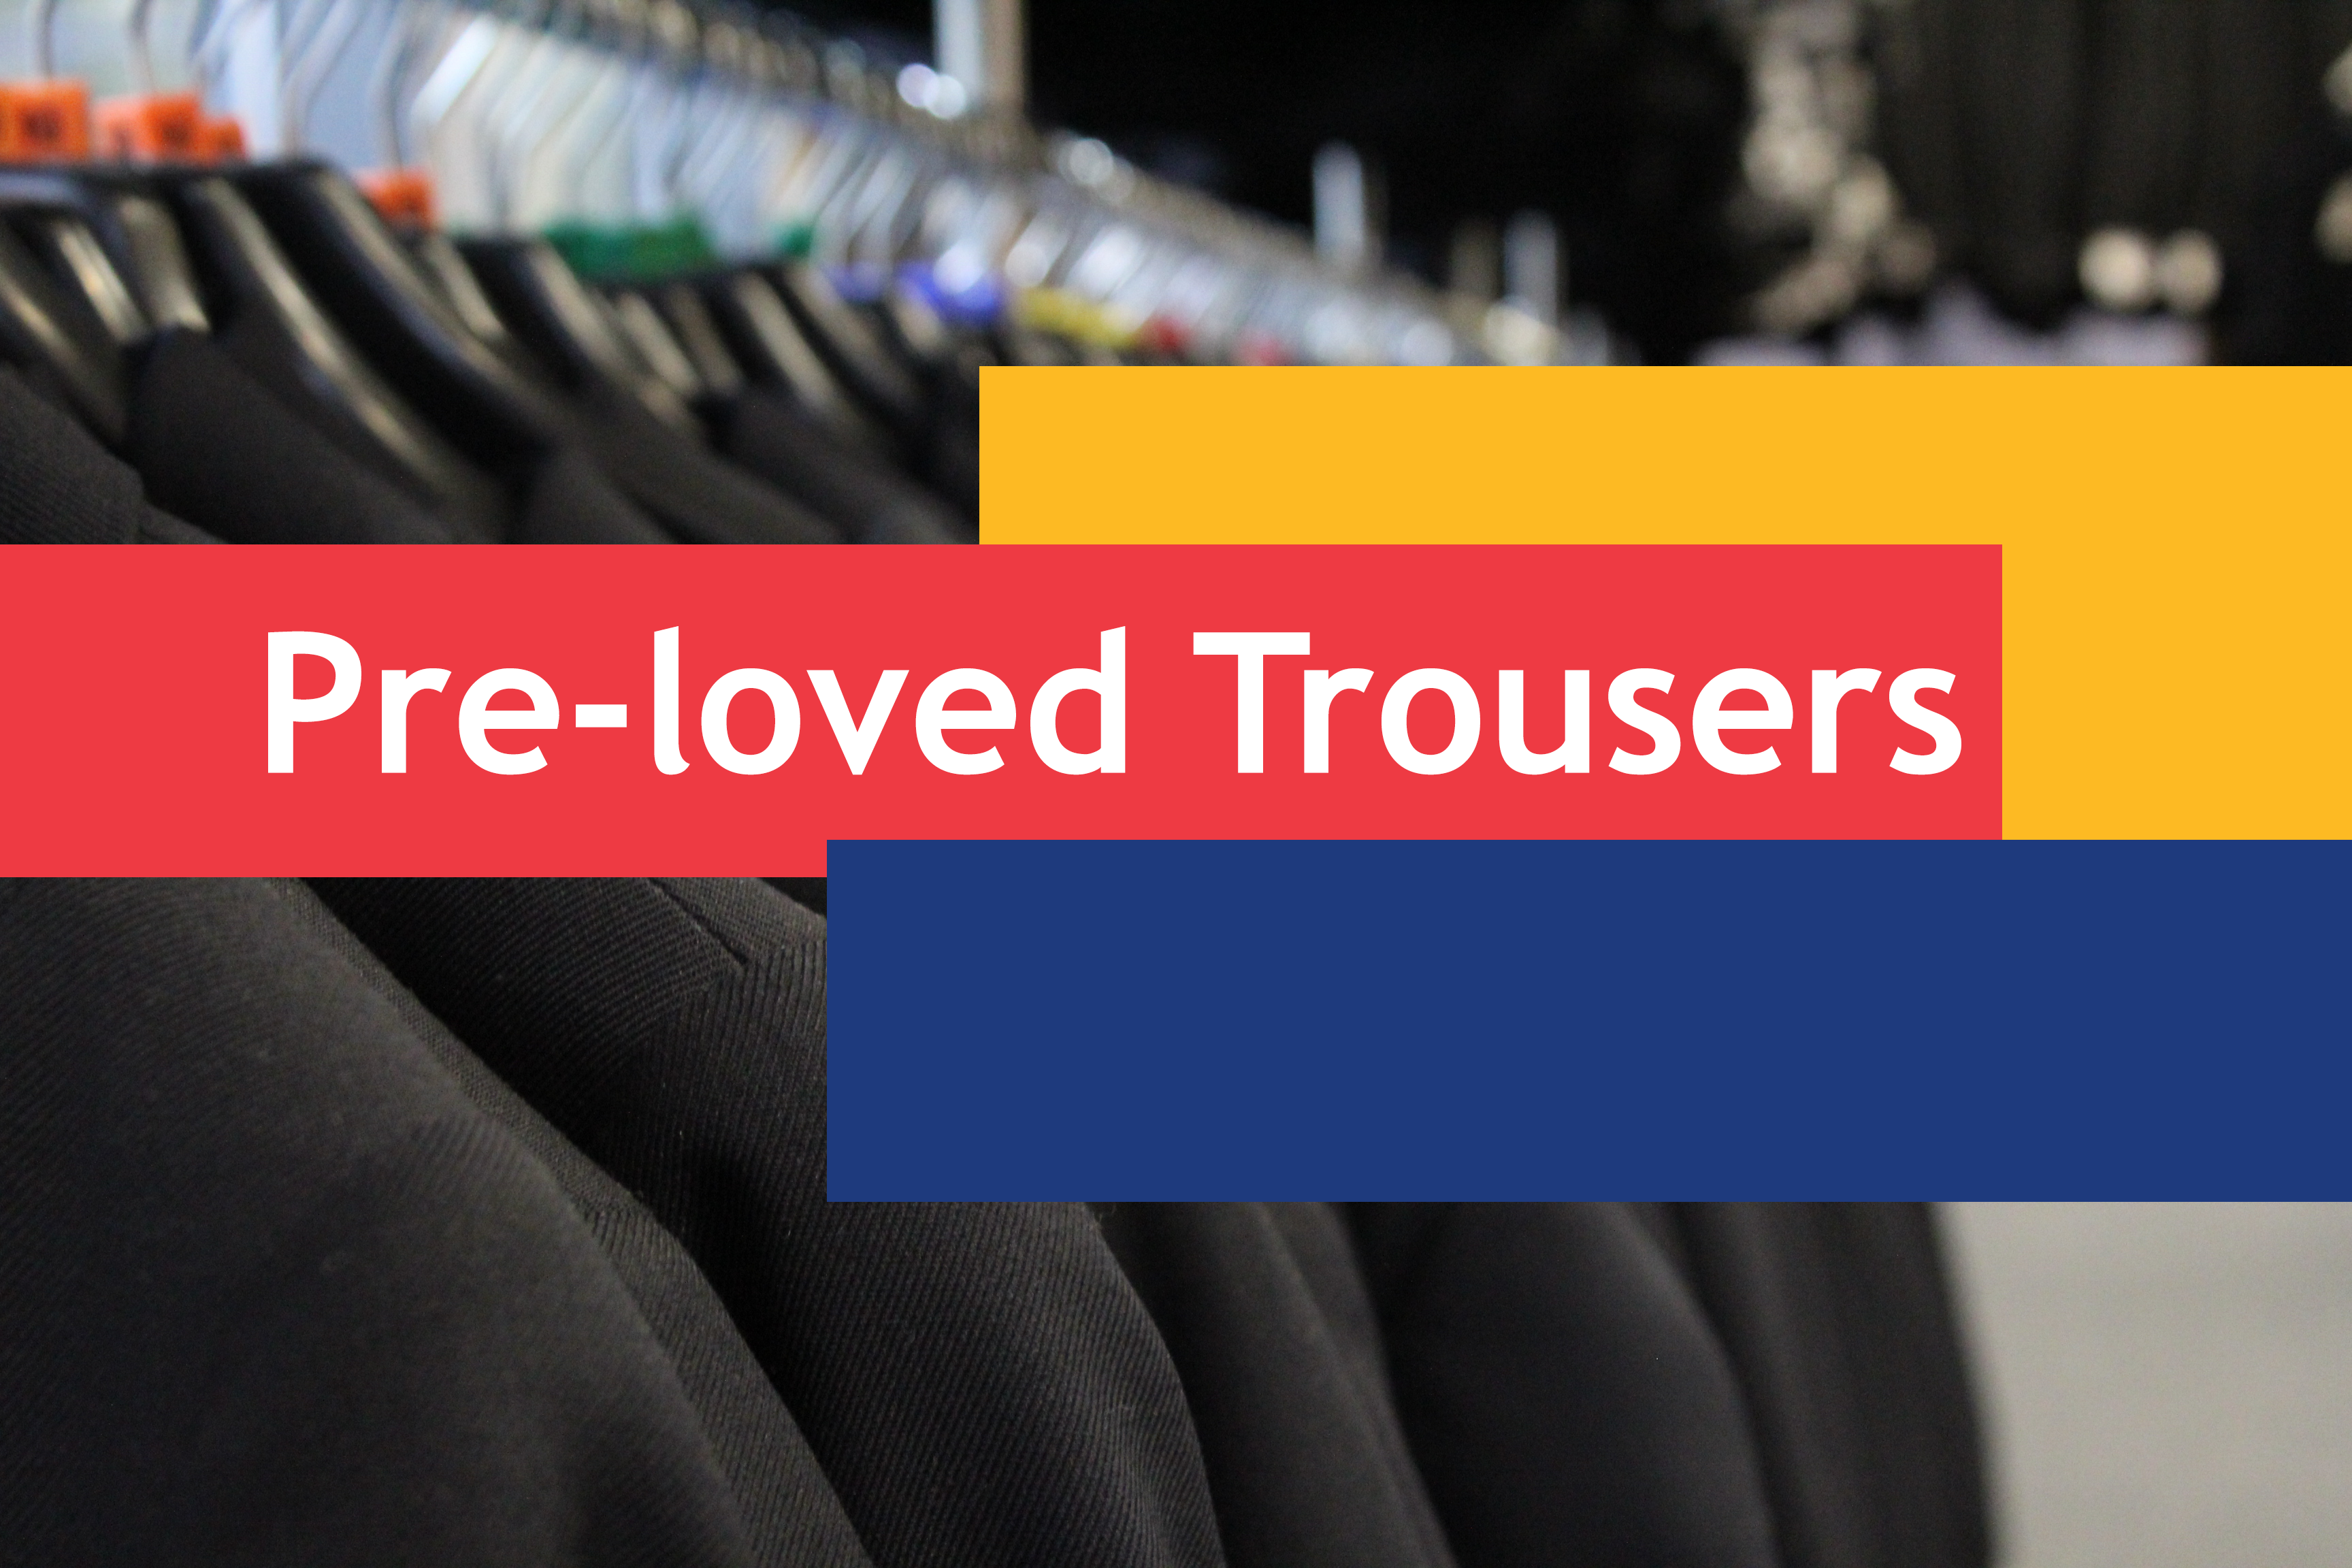 Men's Trousers - Value - Pre-loved (Very Good)